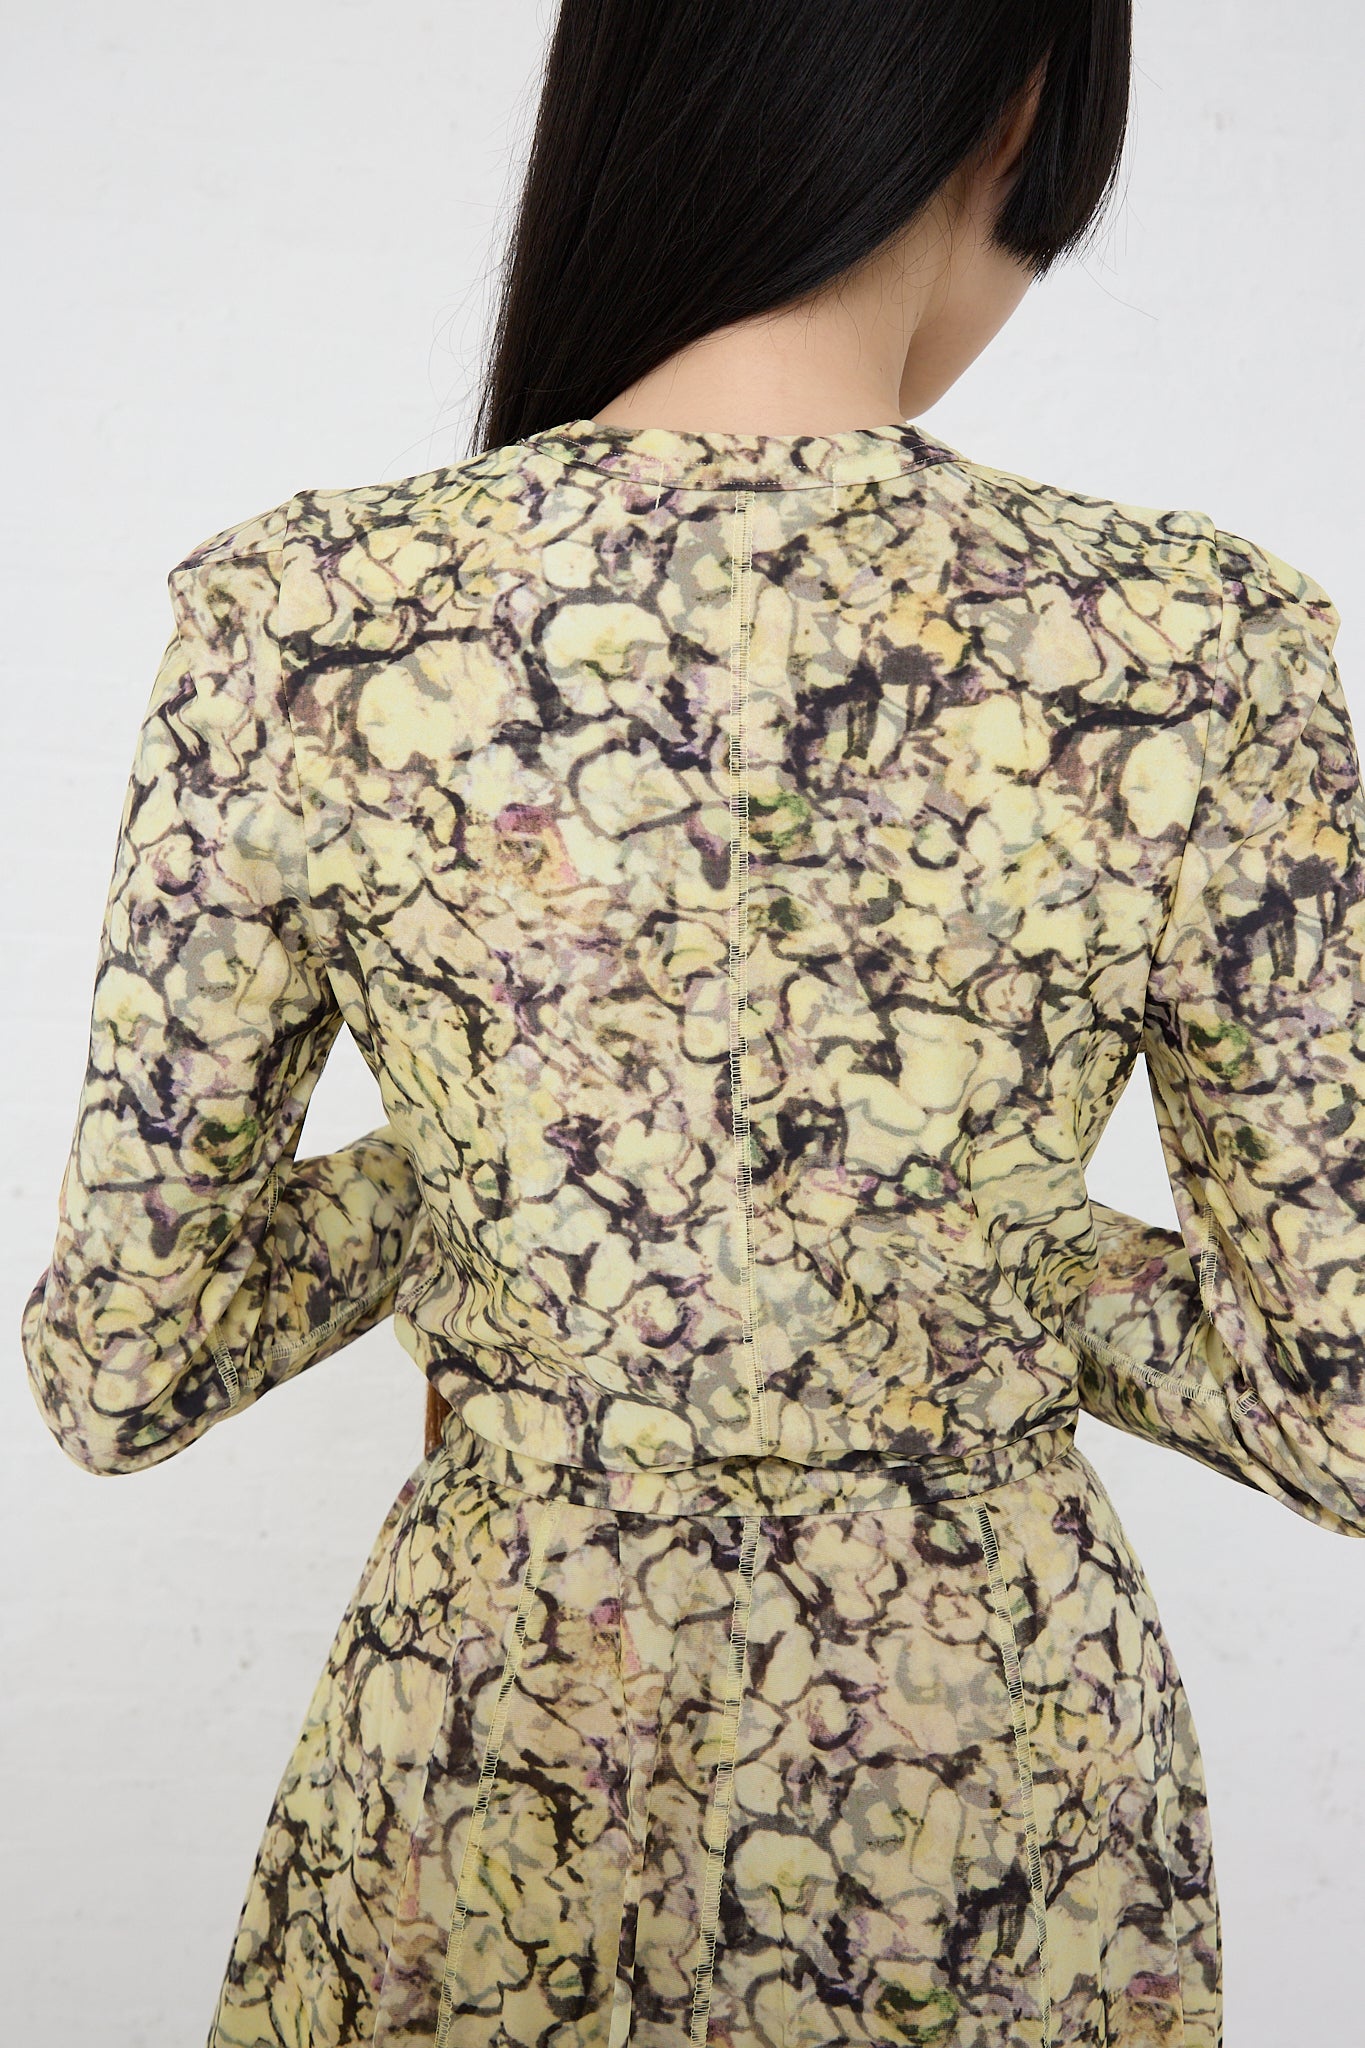 Rear view of a woman wearing a TOGA ARCHIVES Tricot Print Dress in Yellow with a fitted waist and long sleeves, standing against a plain white background.